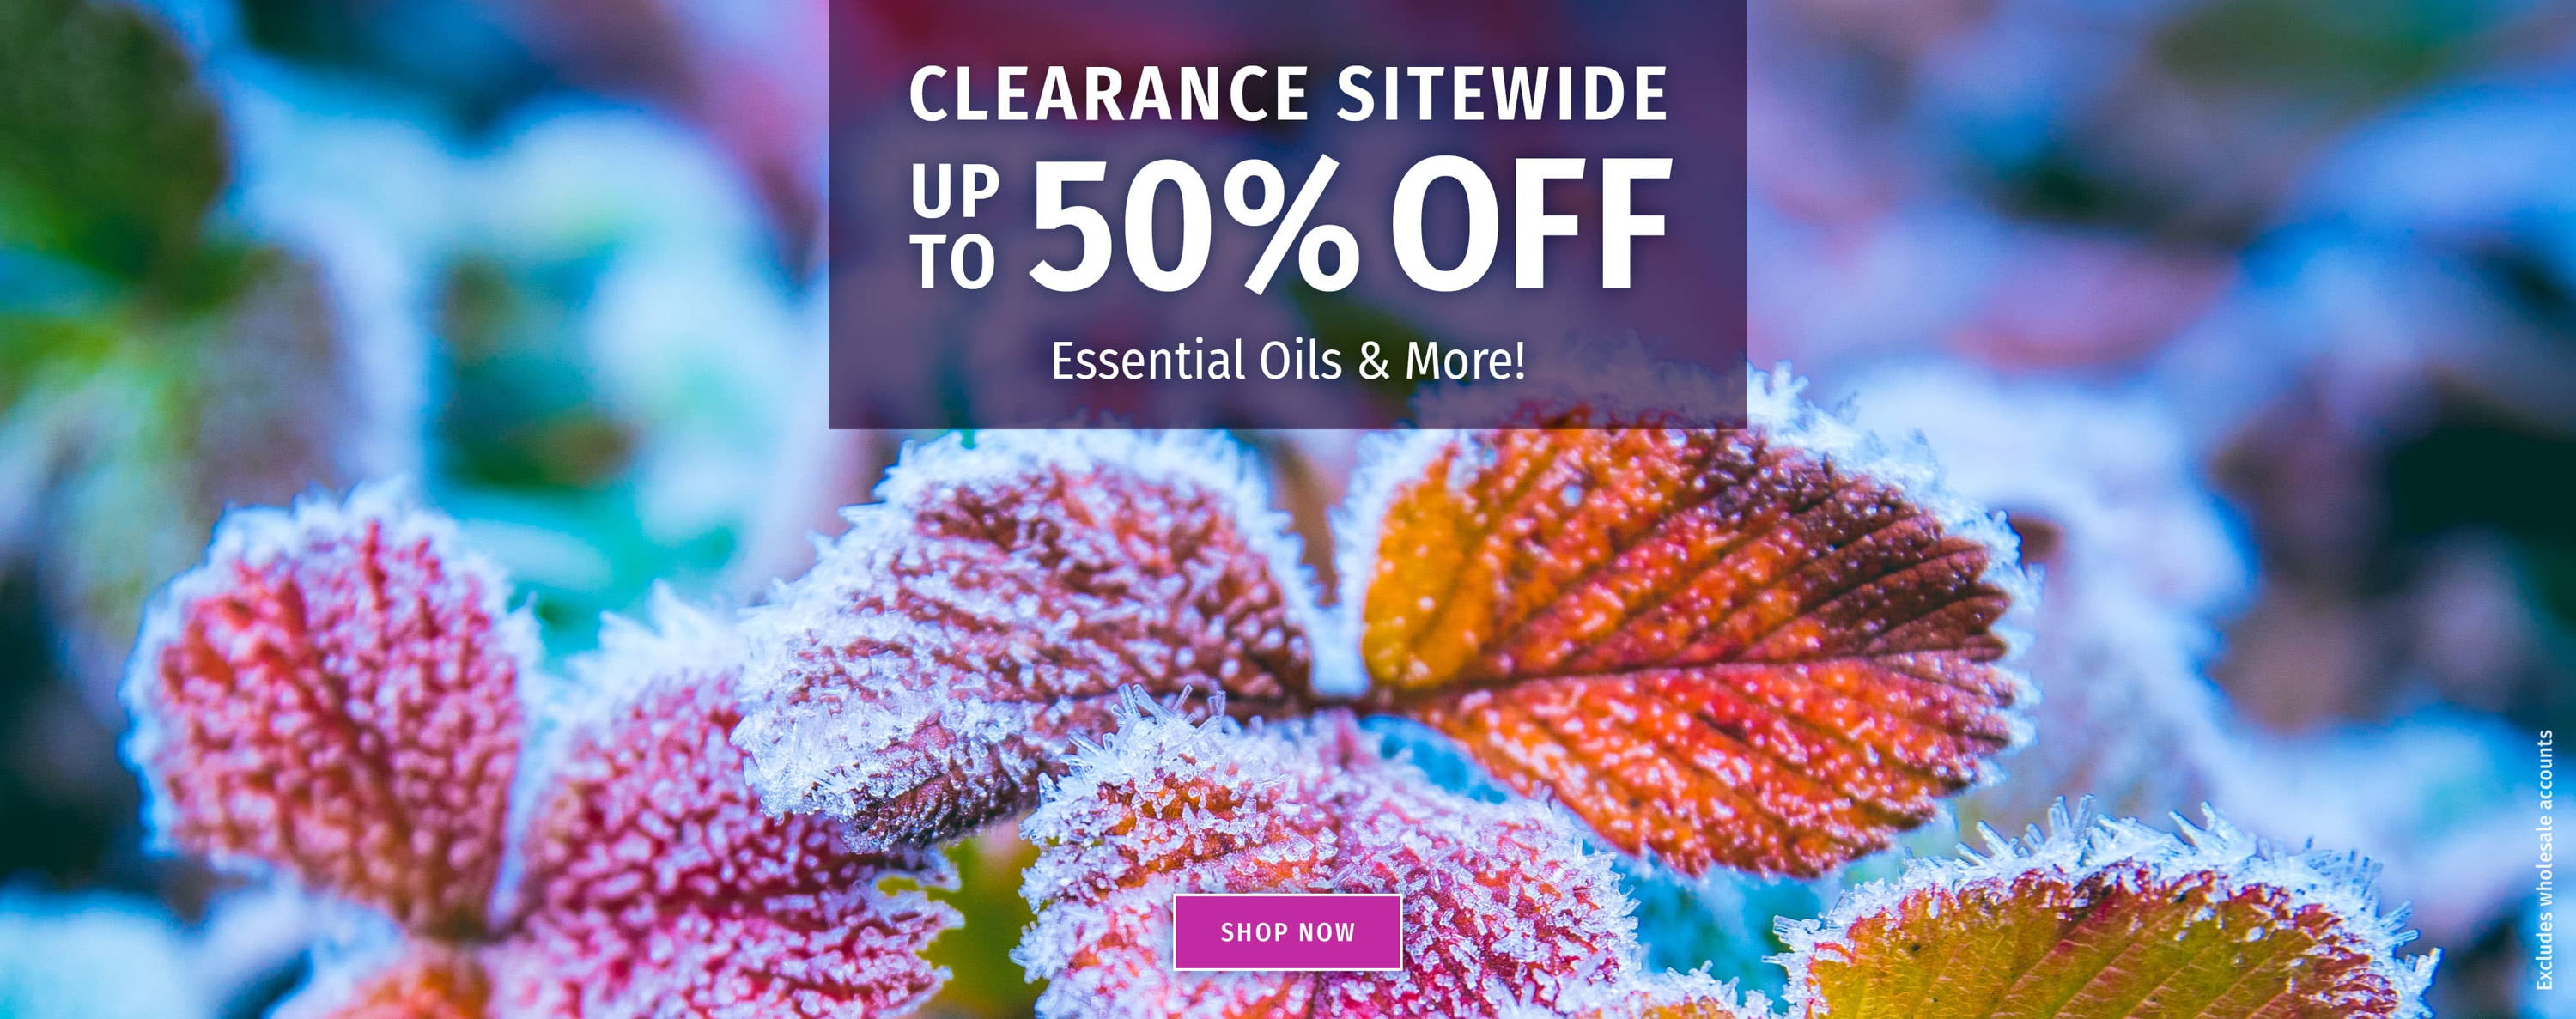 Snow and leaves, Clearance, up to 50% off